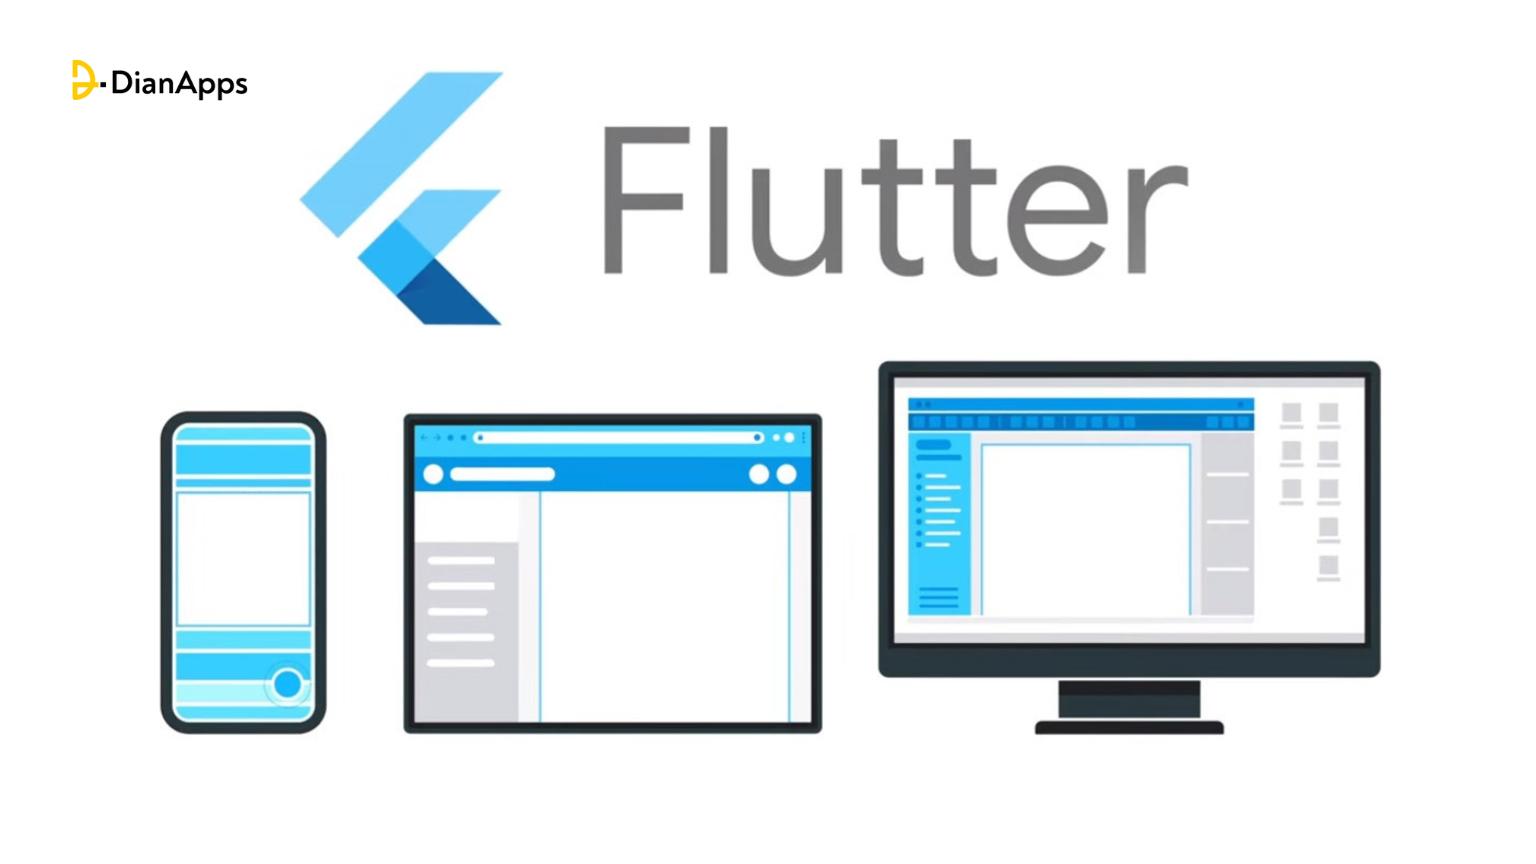 Google’s Flutter is getting improved graphics features, web integration, and More